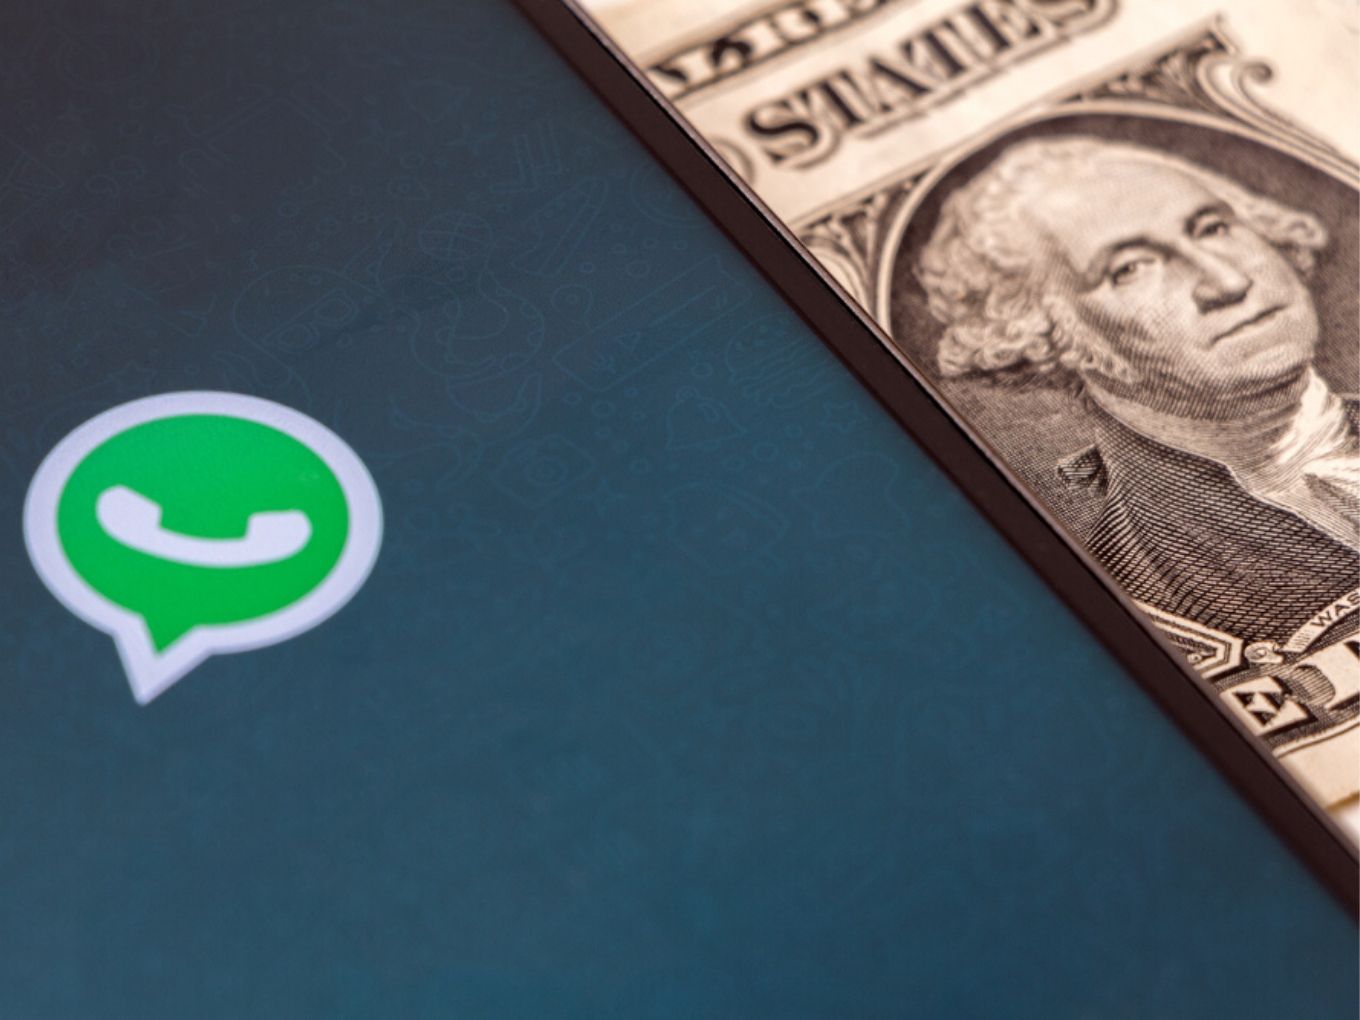 WhatsApp Payments Launch Might Delay Further After Pegasus Debacle